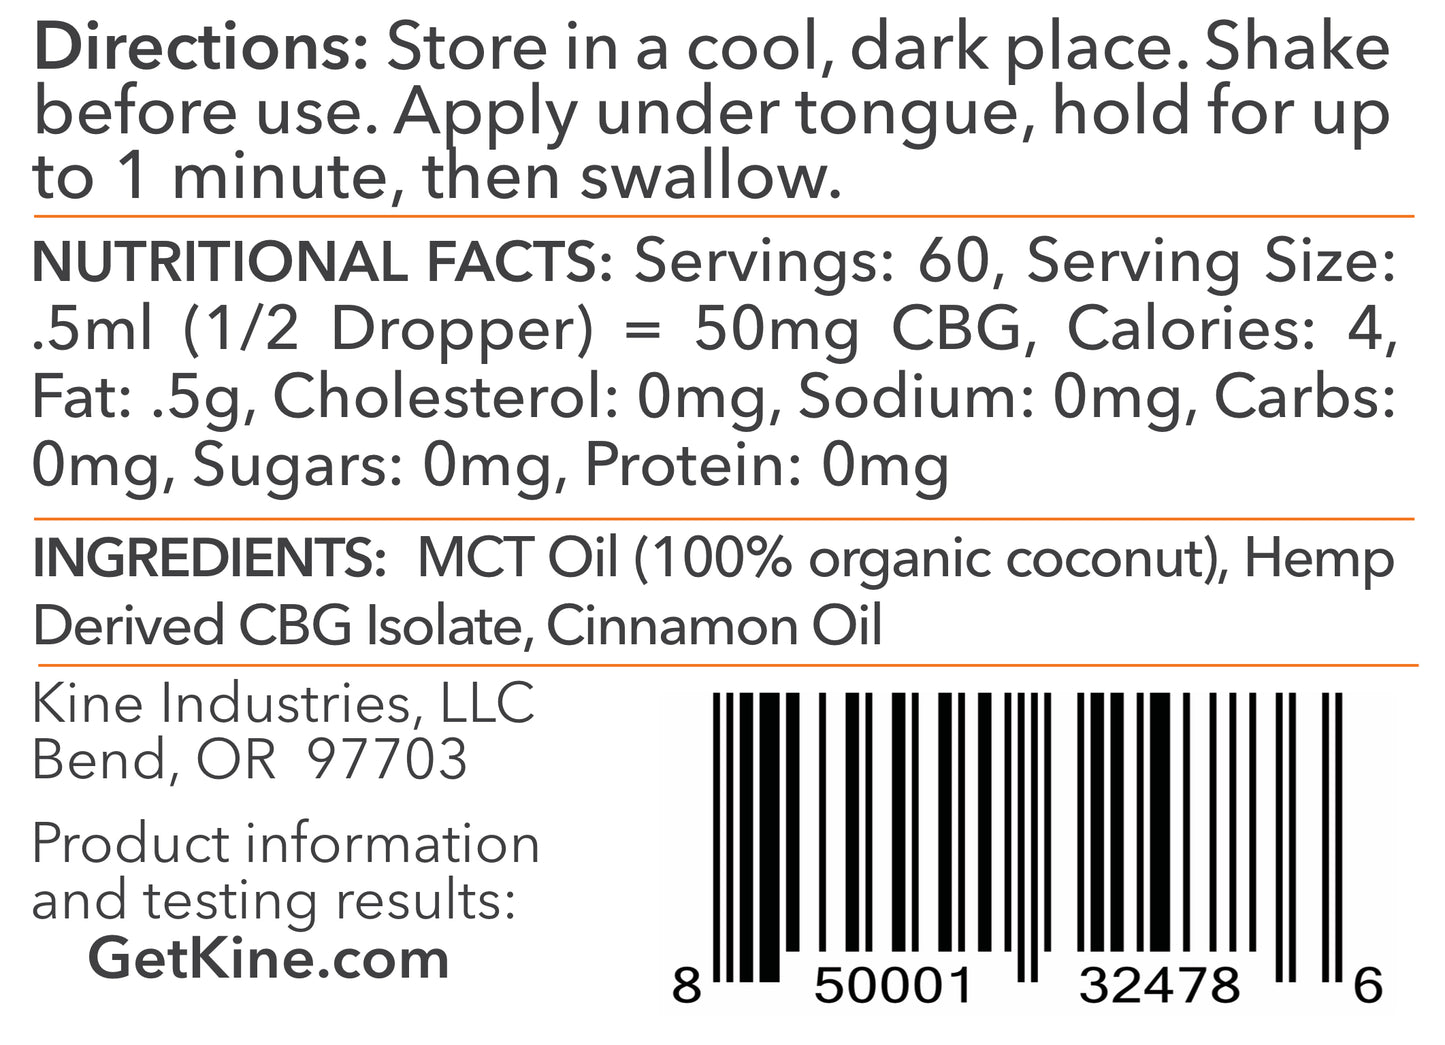 Kine Red Hot Cinnamon Flavored Organic CBG 3000mg tincture drops ingredients list and nutritional facts